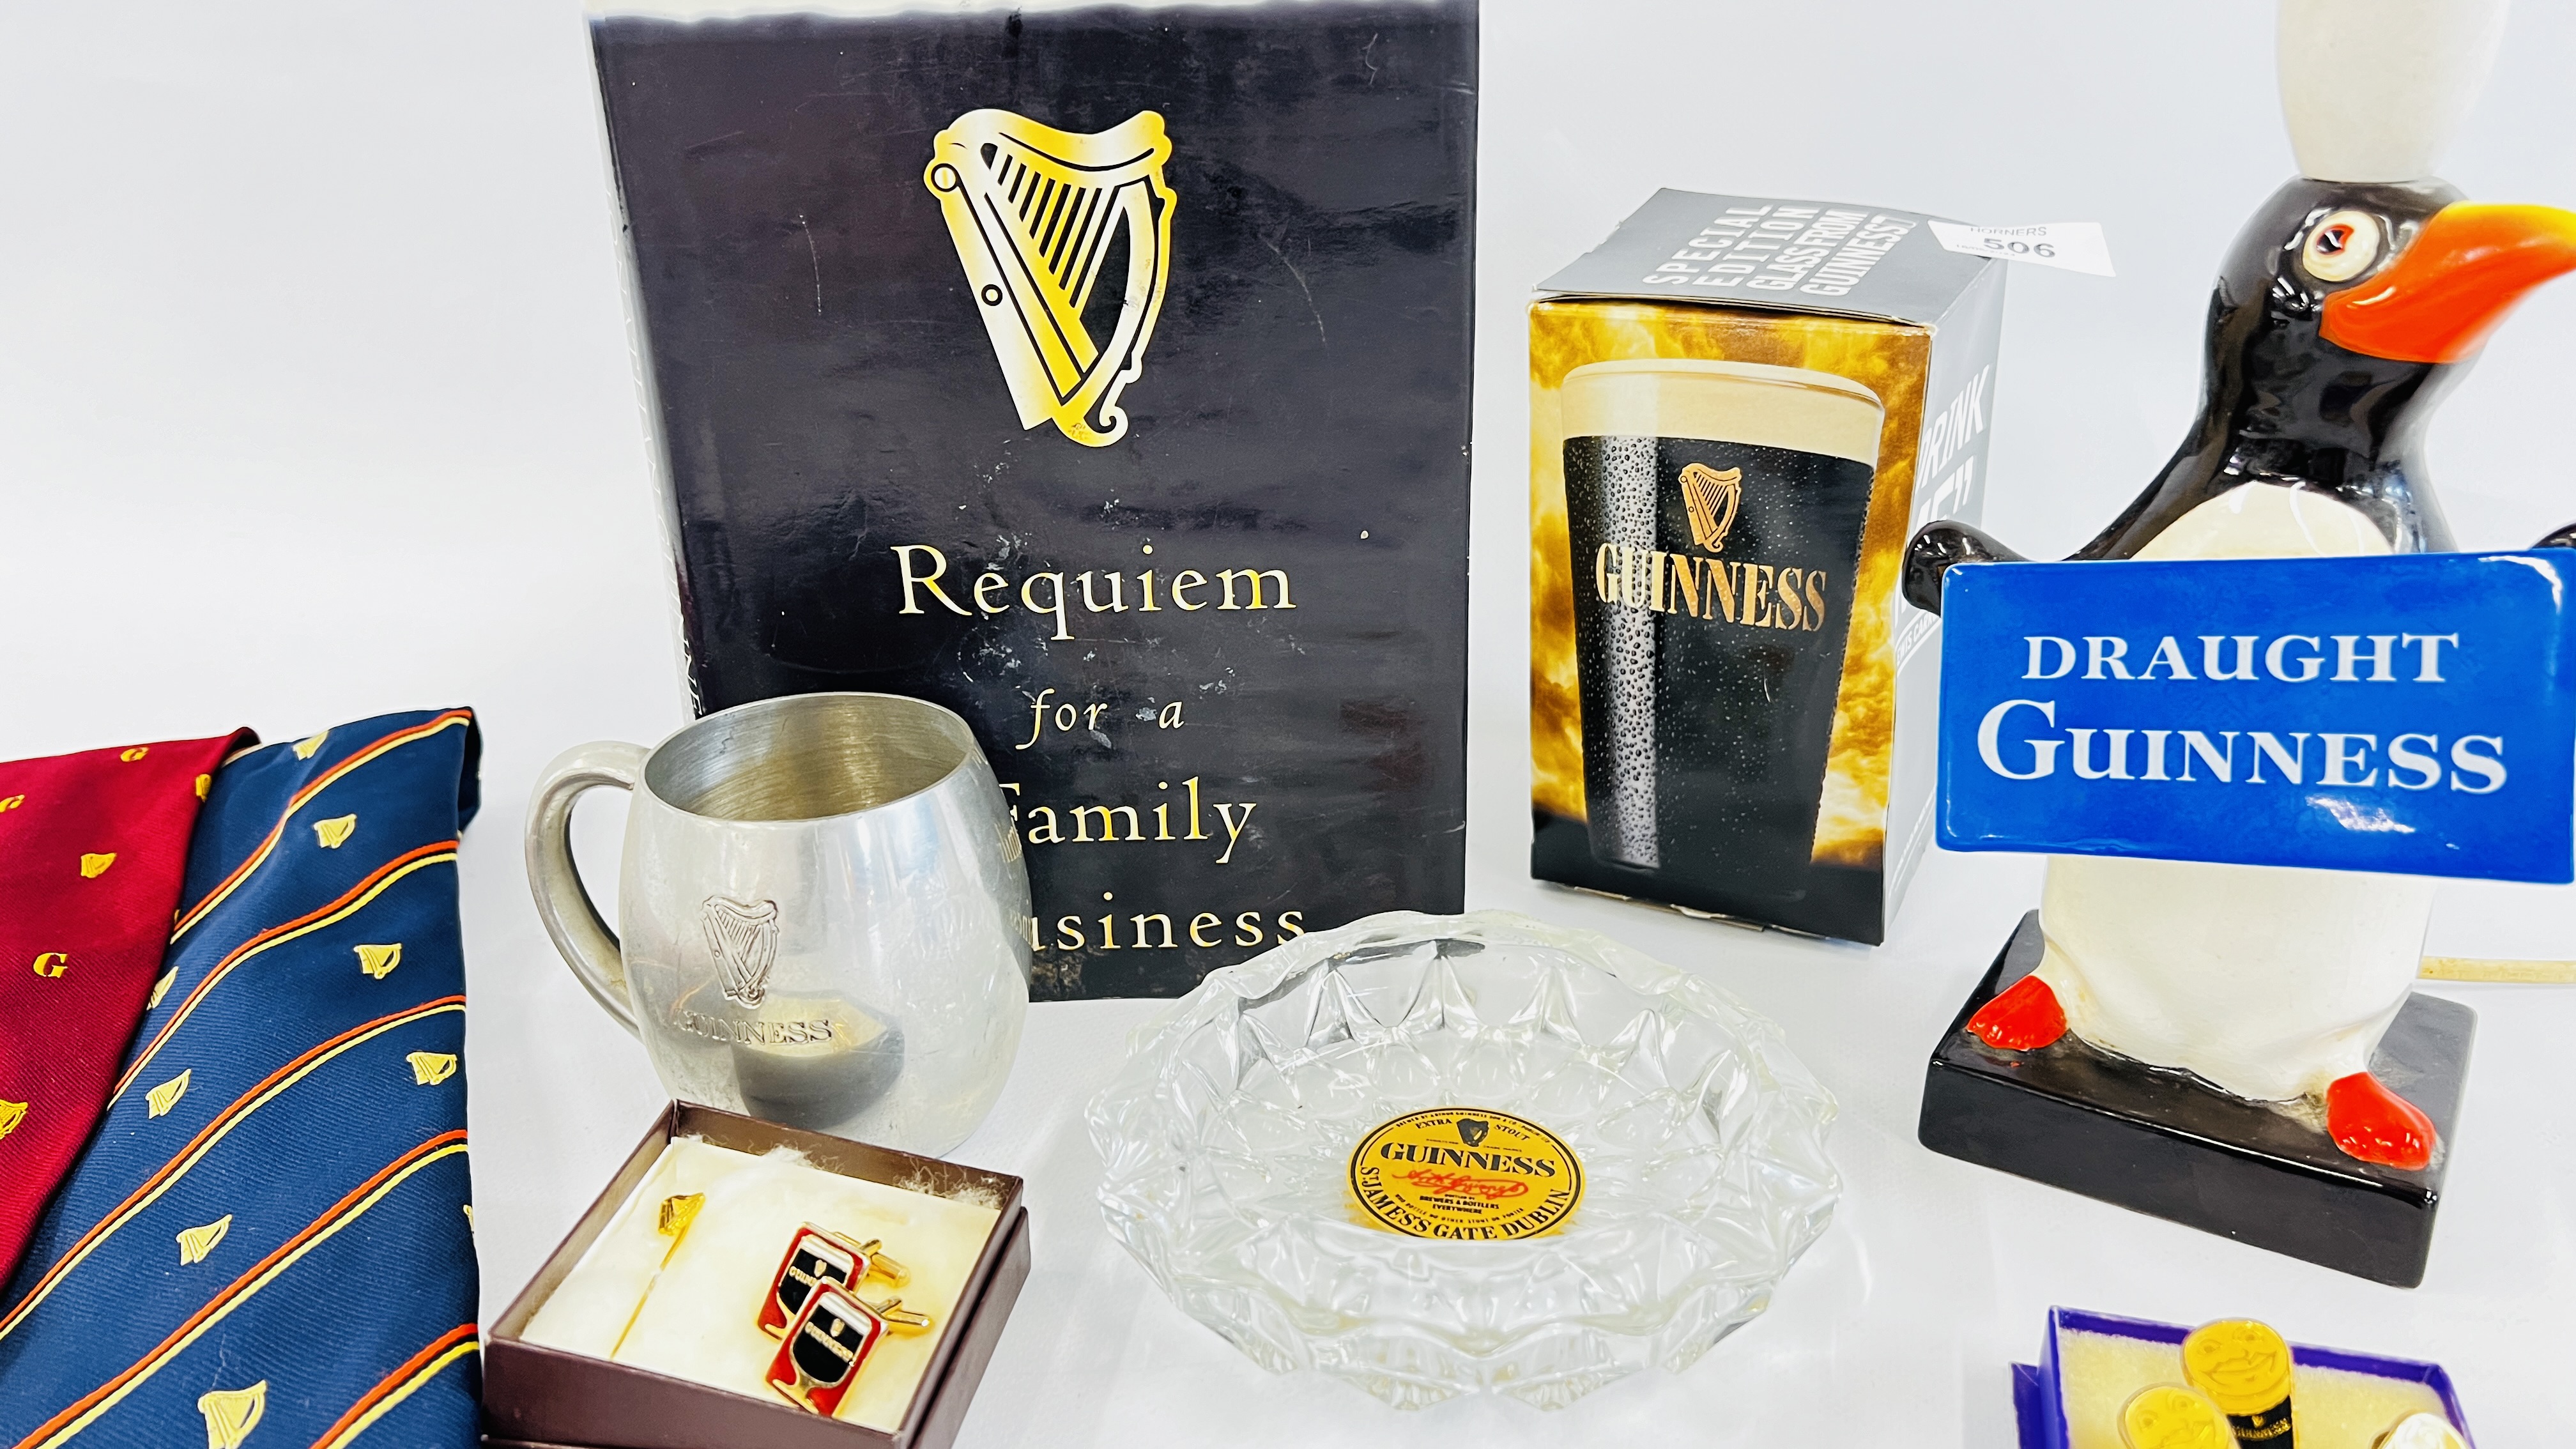 GUINNESS MERCHANDISE TO INCLUDE VINTAGE PENGUIN "DRAUGHT GUINNESS" TABLE LAMP, CUFF LINKS, - Bild 4 aus 7